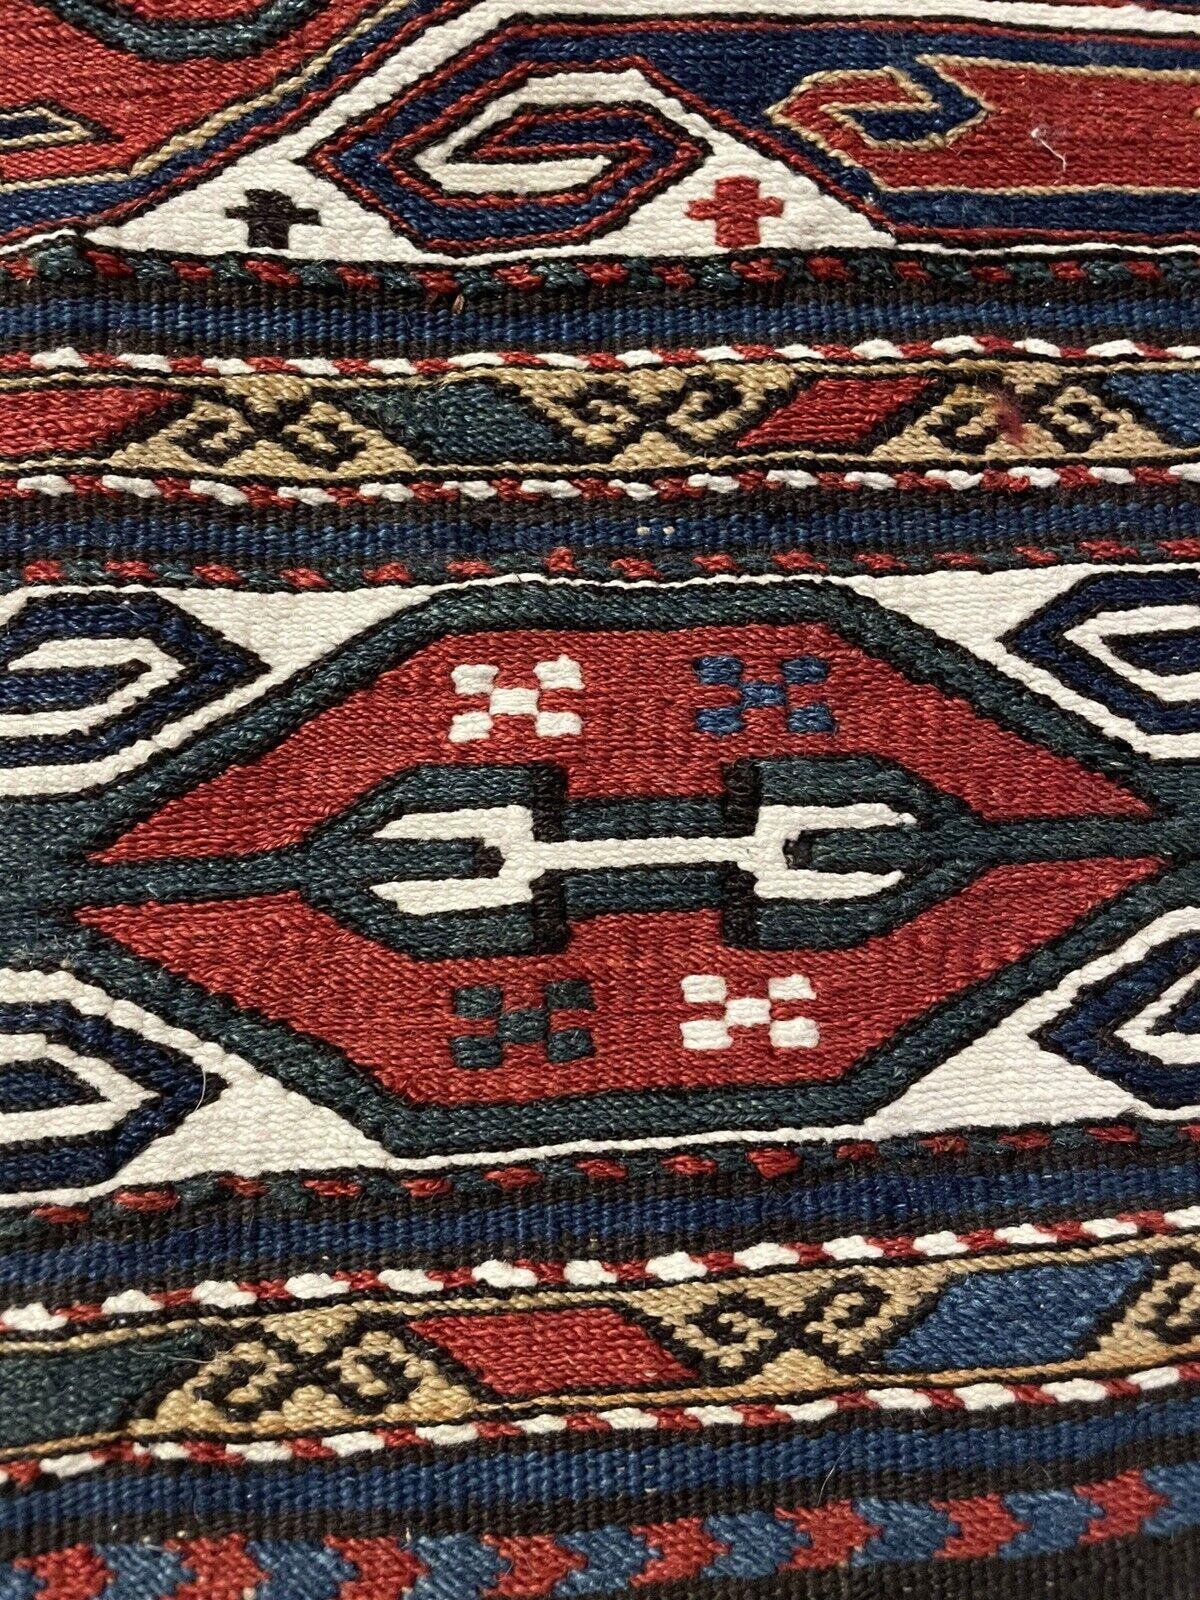 Early 20th Century Handmade Antique Persian Style Sumak Collectible Kilim 1.3' x 1.8, 1900s - 1N04 For Sale